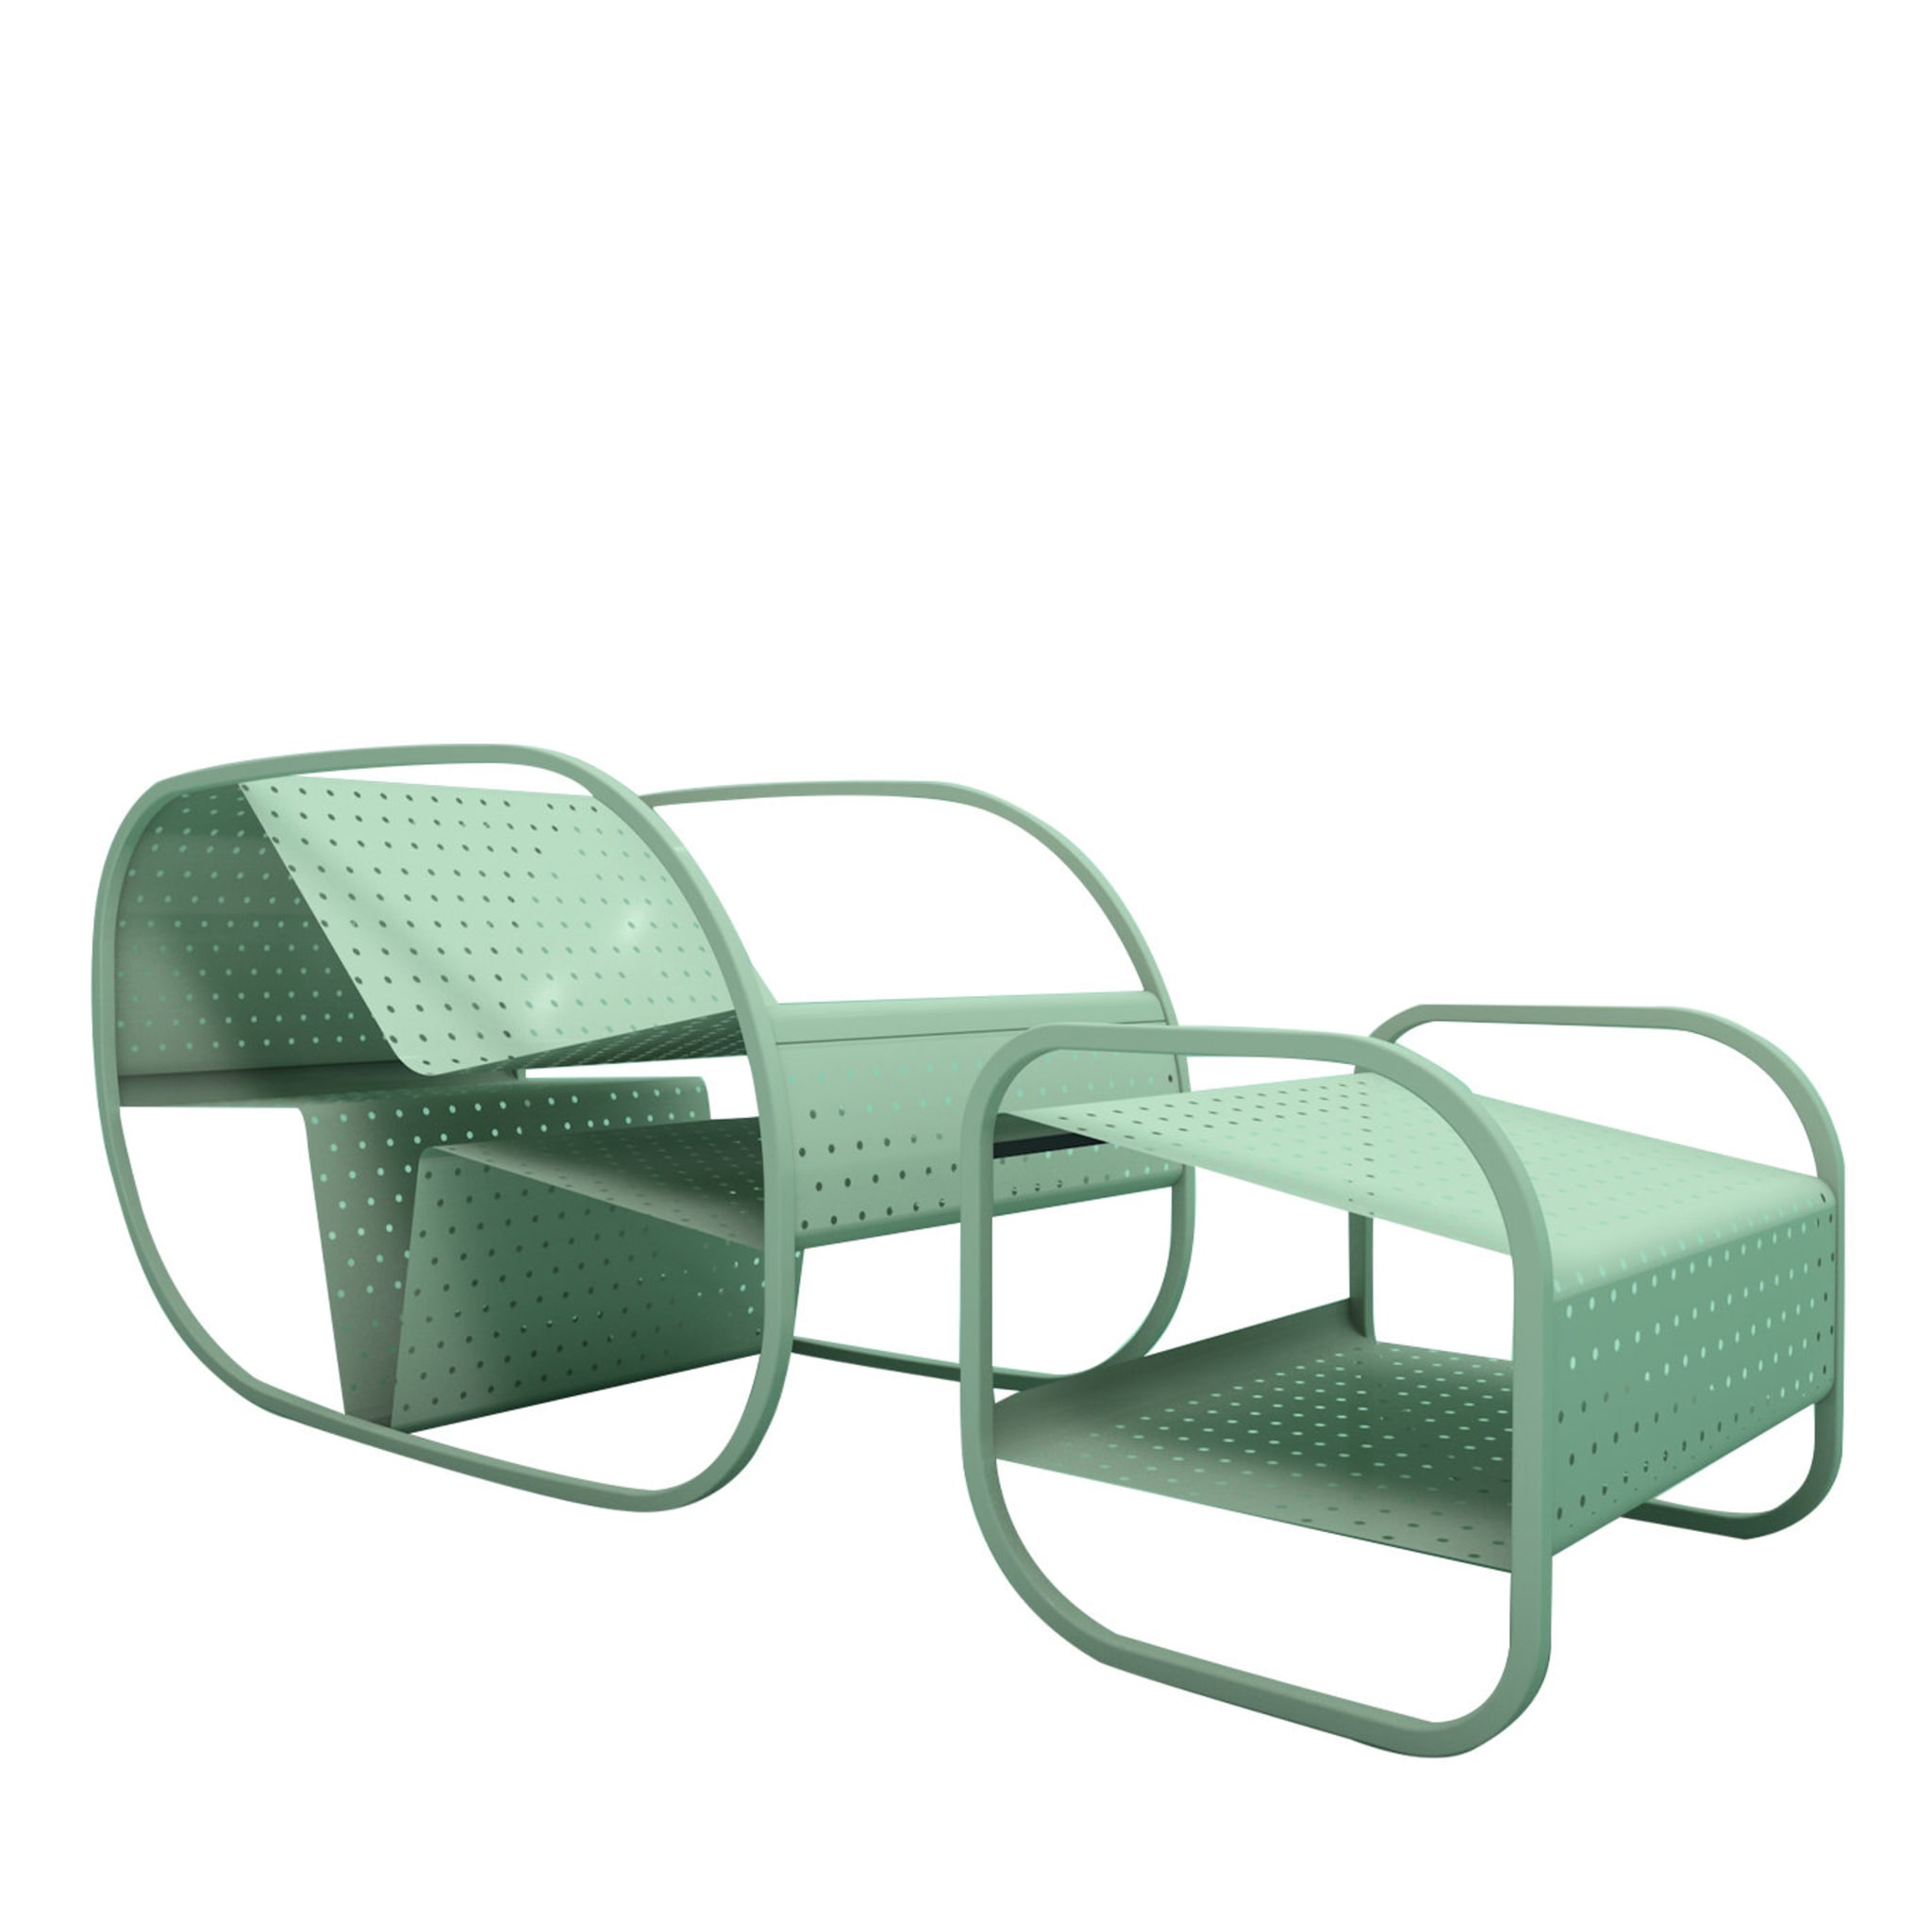 Flip Mint Seat and Sidetable by Salomé Hazan - Main view